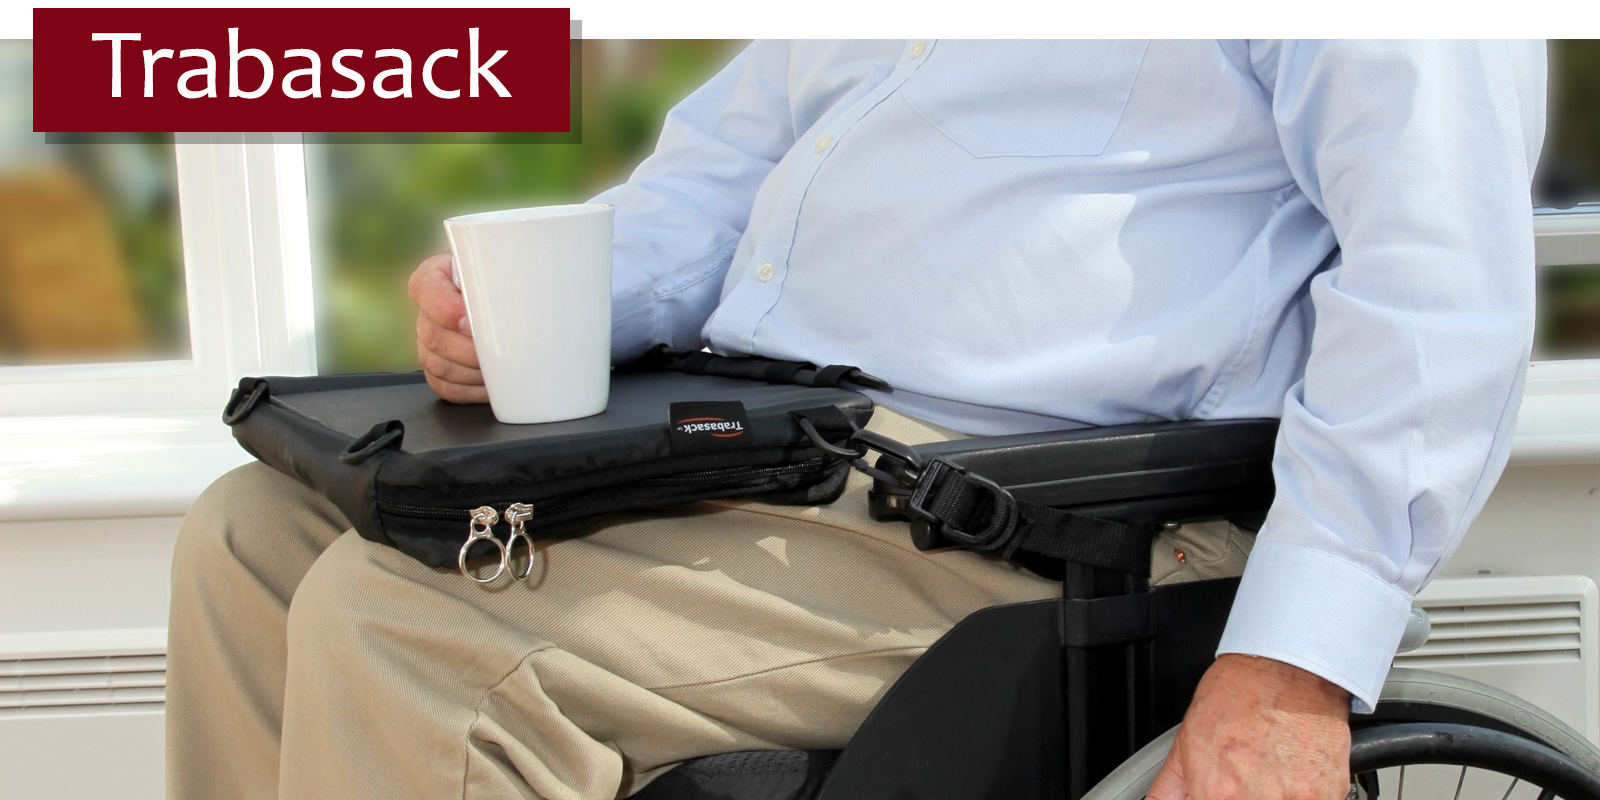 Image is a photograph of a man sat in a wheelchair with a Trabasack Mini lap tray bag on his lap, using the built-in tray to carry a mug of drink. In the top lefthand corner of the image text reads 